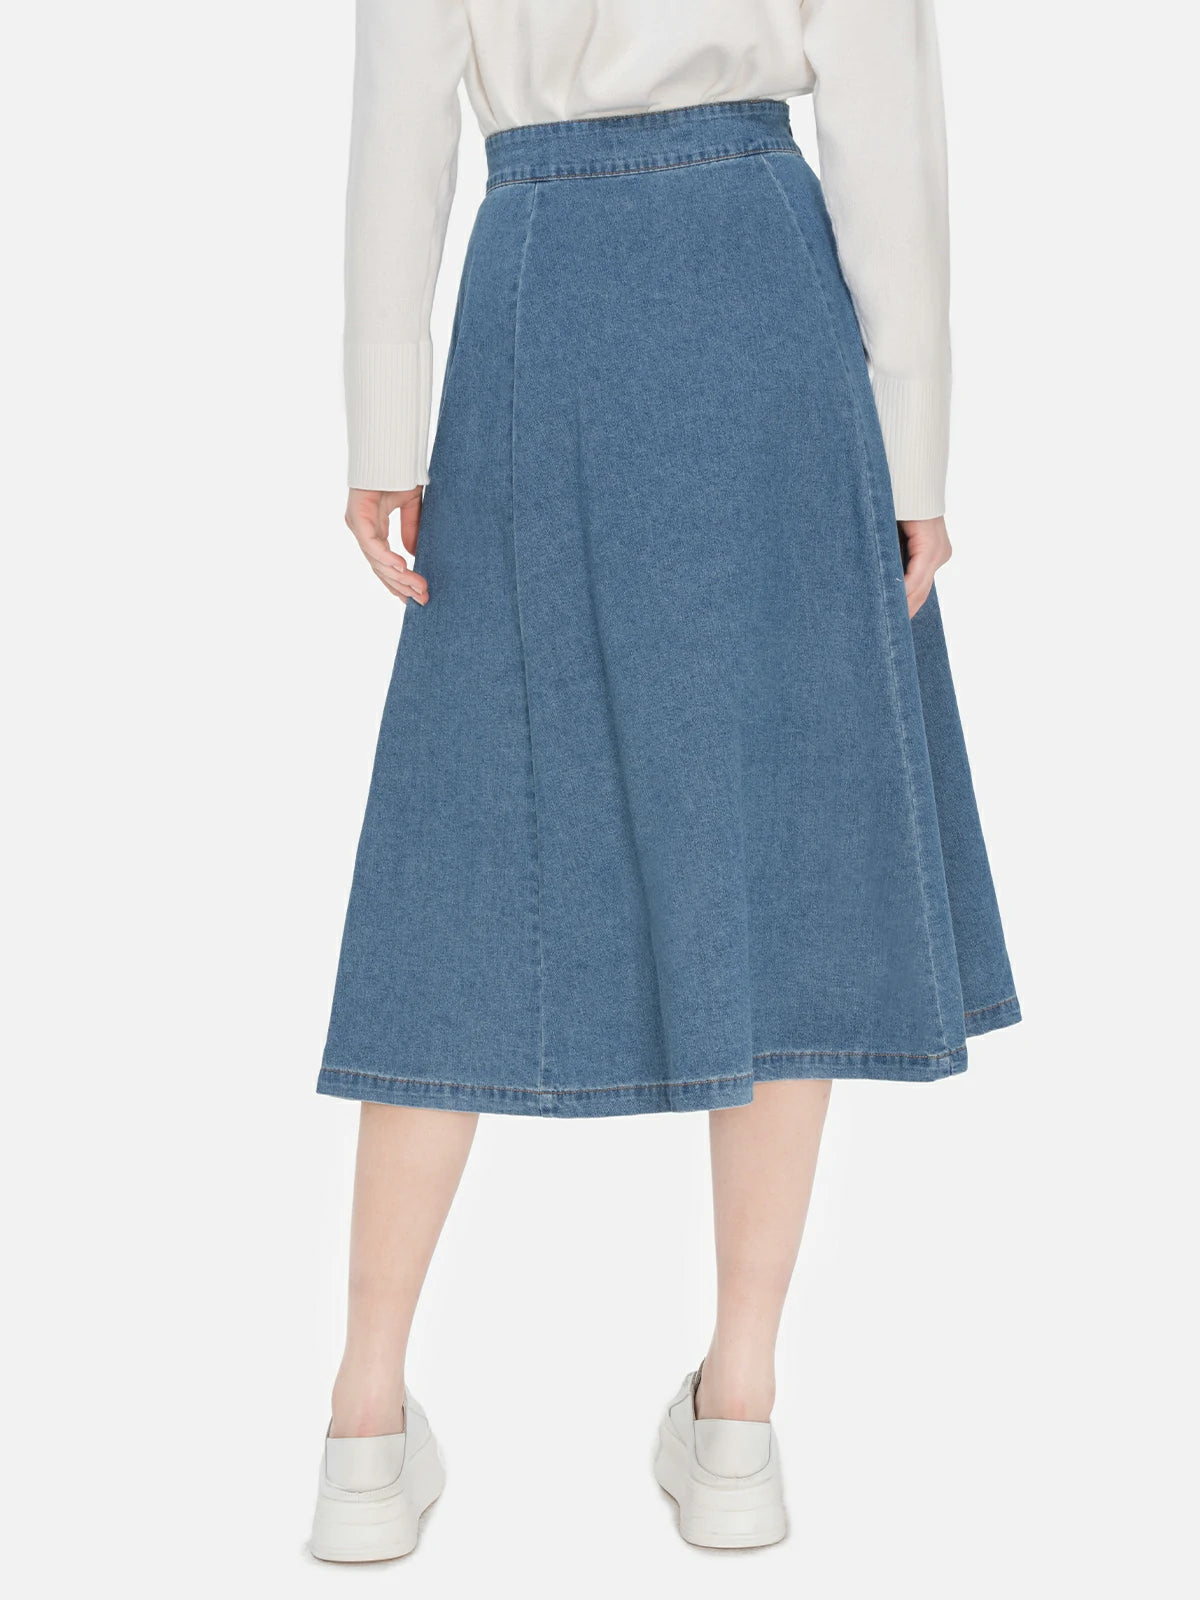 Stylish and durable blue denim A-line skirt with a classic design, and high waist, offering a timeless and comfortable choice for everyday fashion.